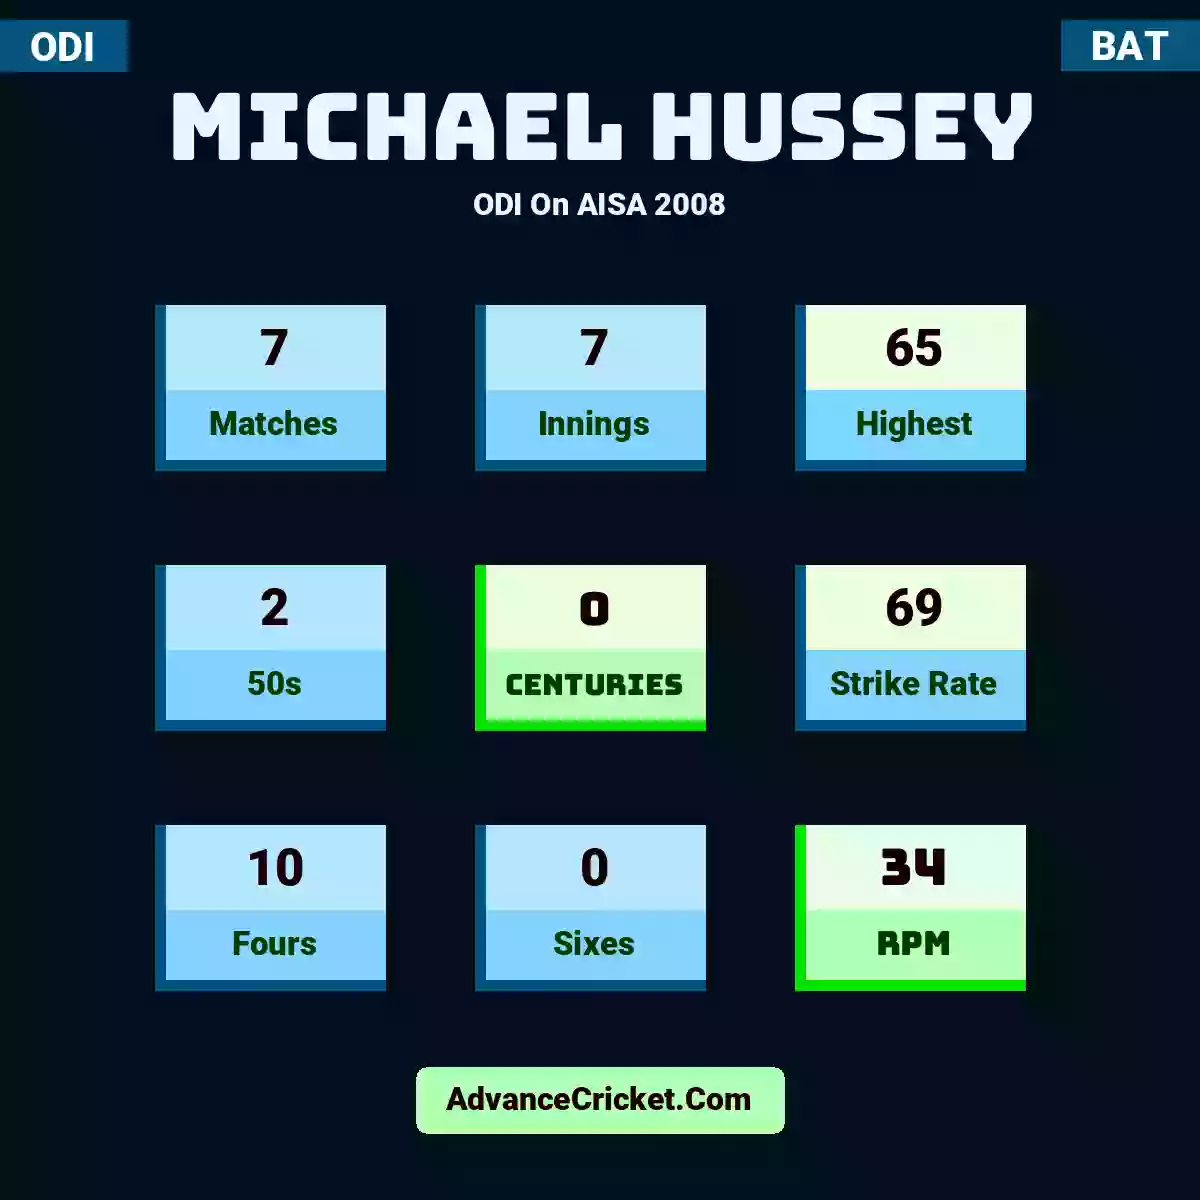 Michael Hussey ODI  On AISA 2008, Michael Hussey played 7 matches, scored 65 runs as highest, 2 half-centuries, and 0 centuries, with a strike rate of 69. M.Hussey hit 10 fours and 0 sixes, with an RPM of 34.